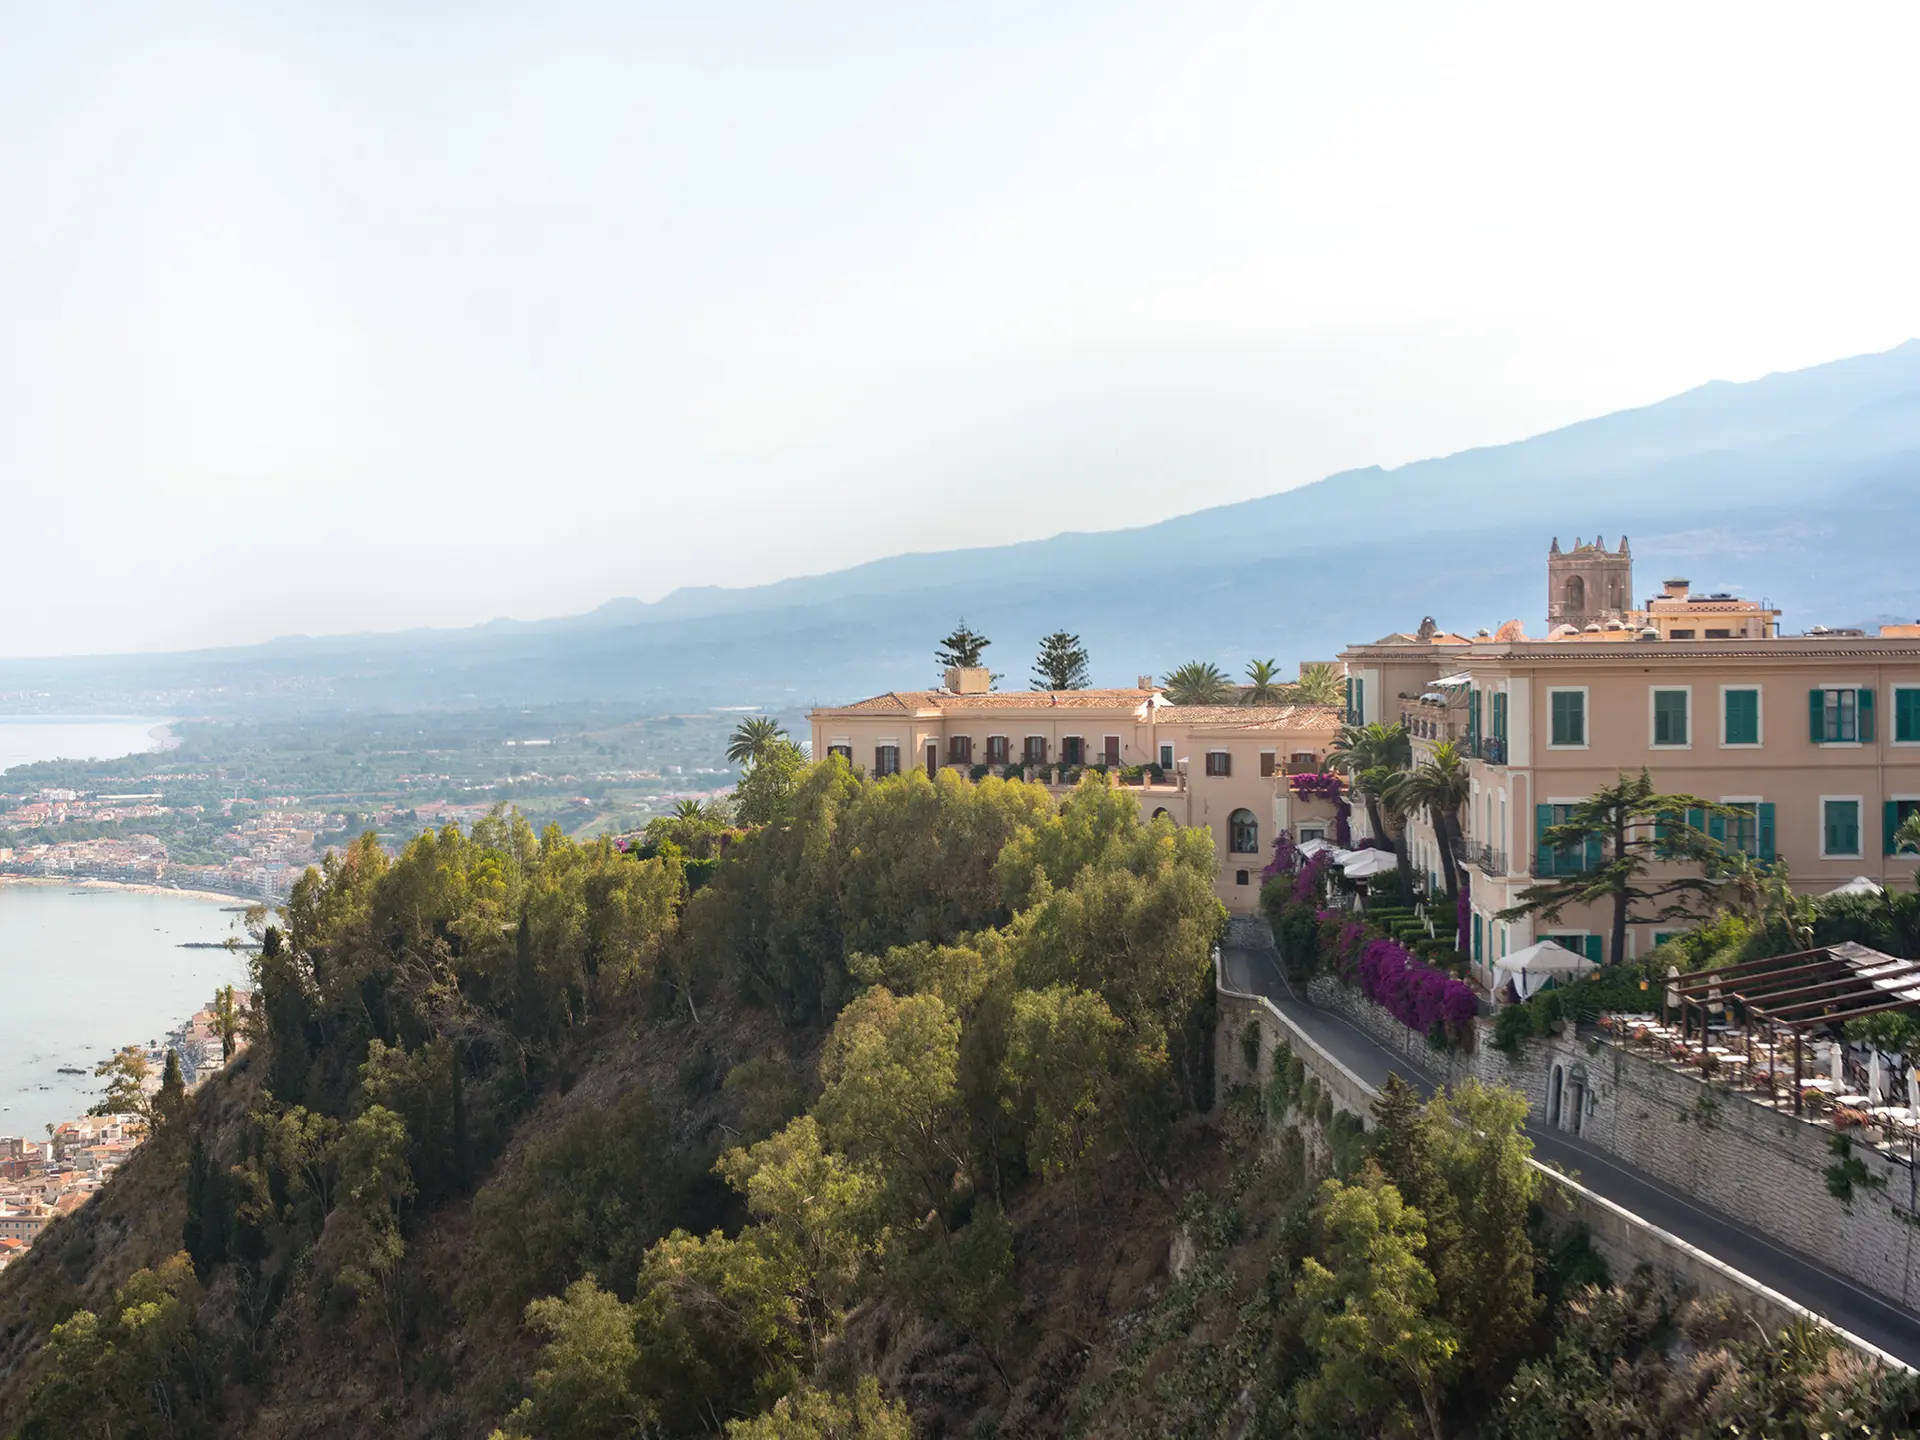 Hotels Articles - Four Seasons set to reopen the San Domenico Palace